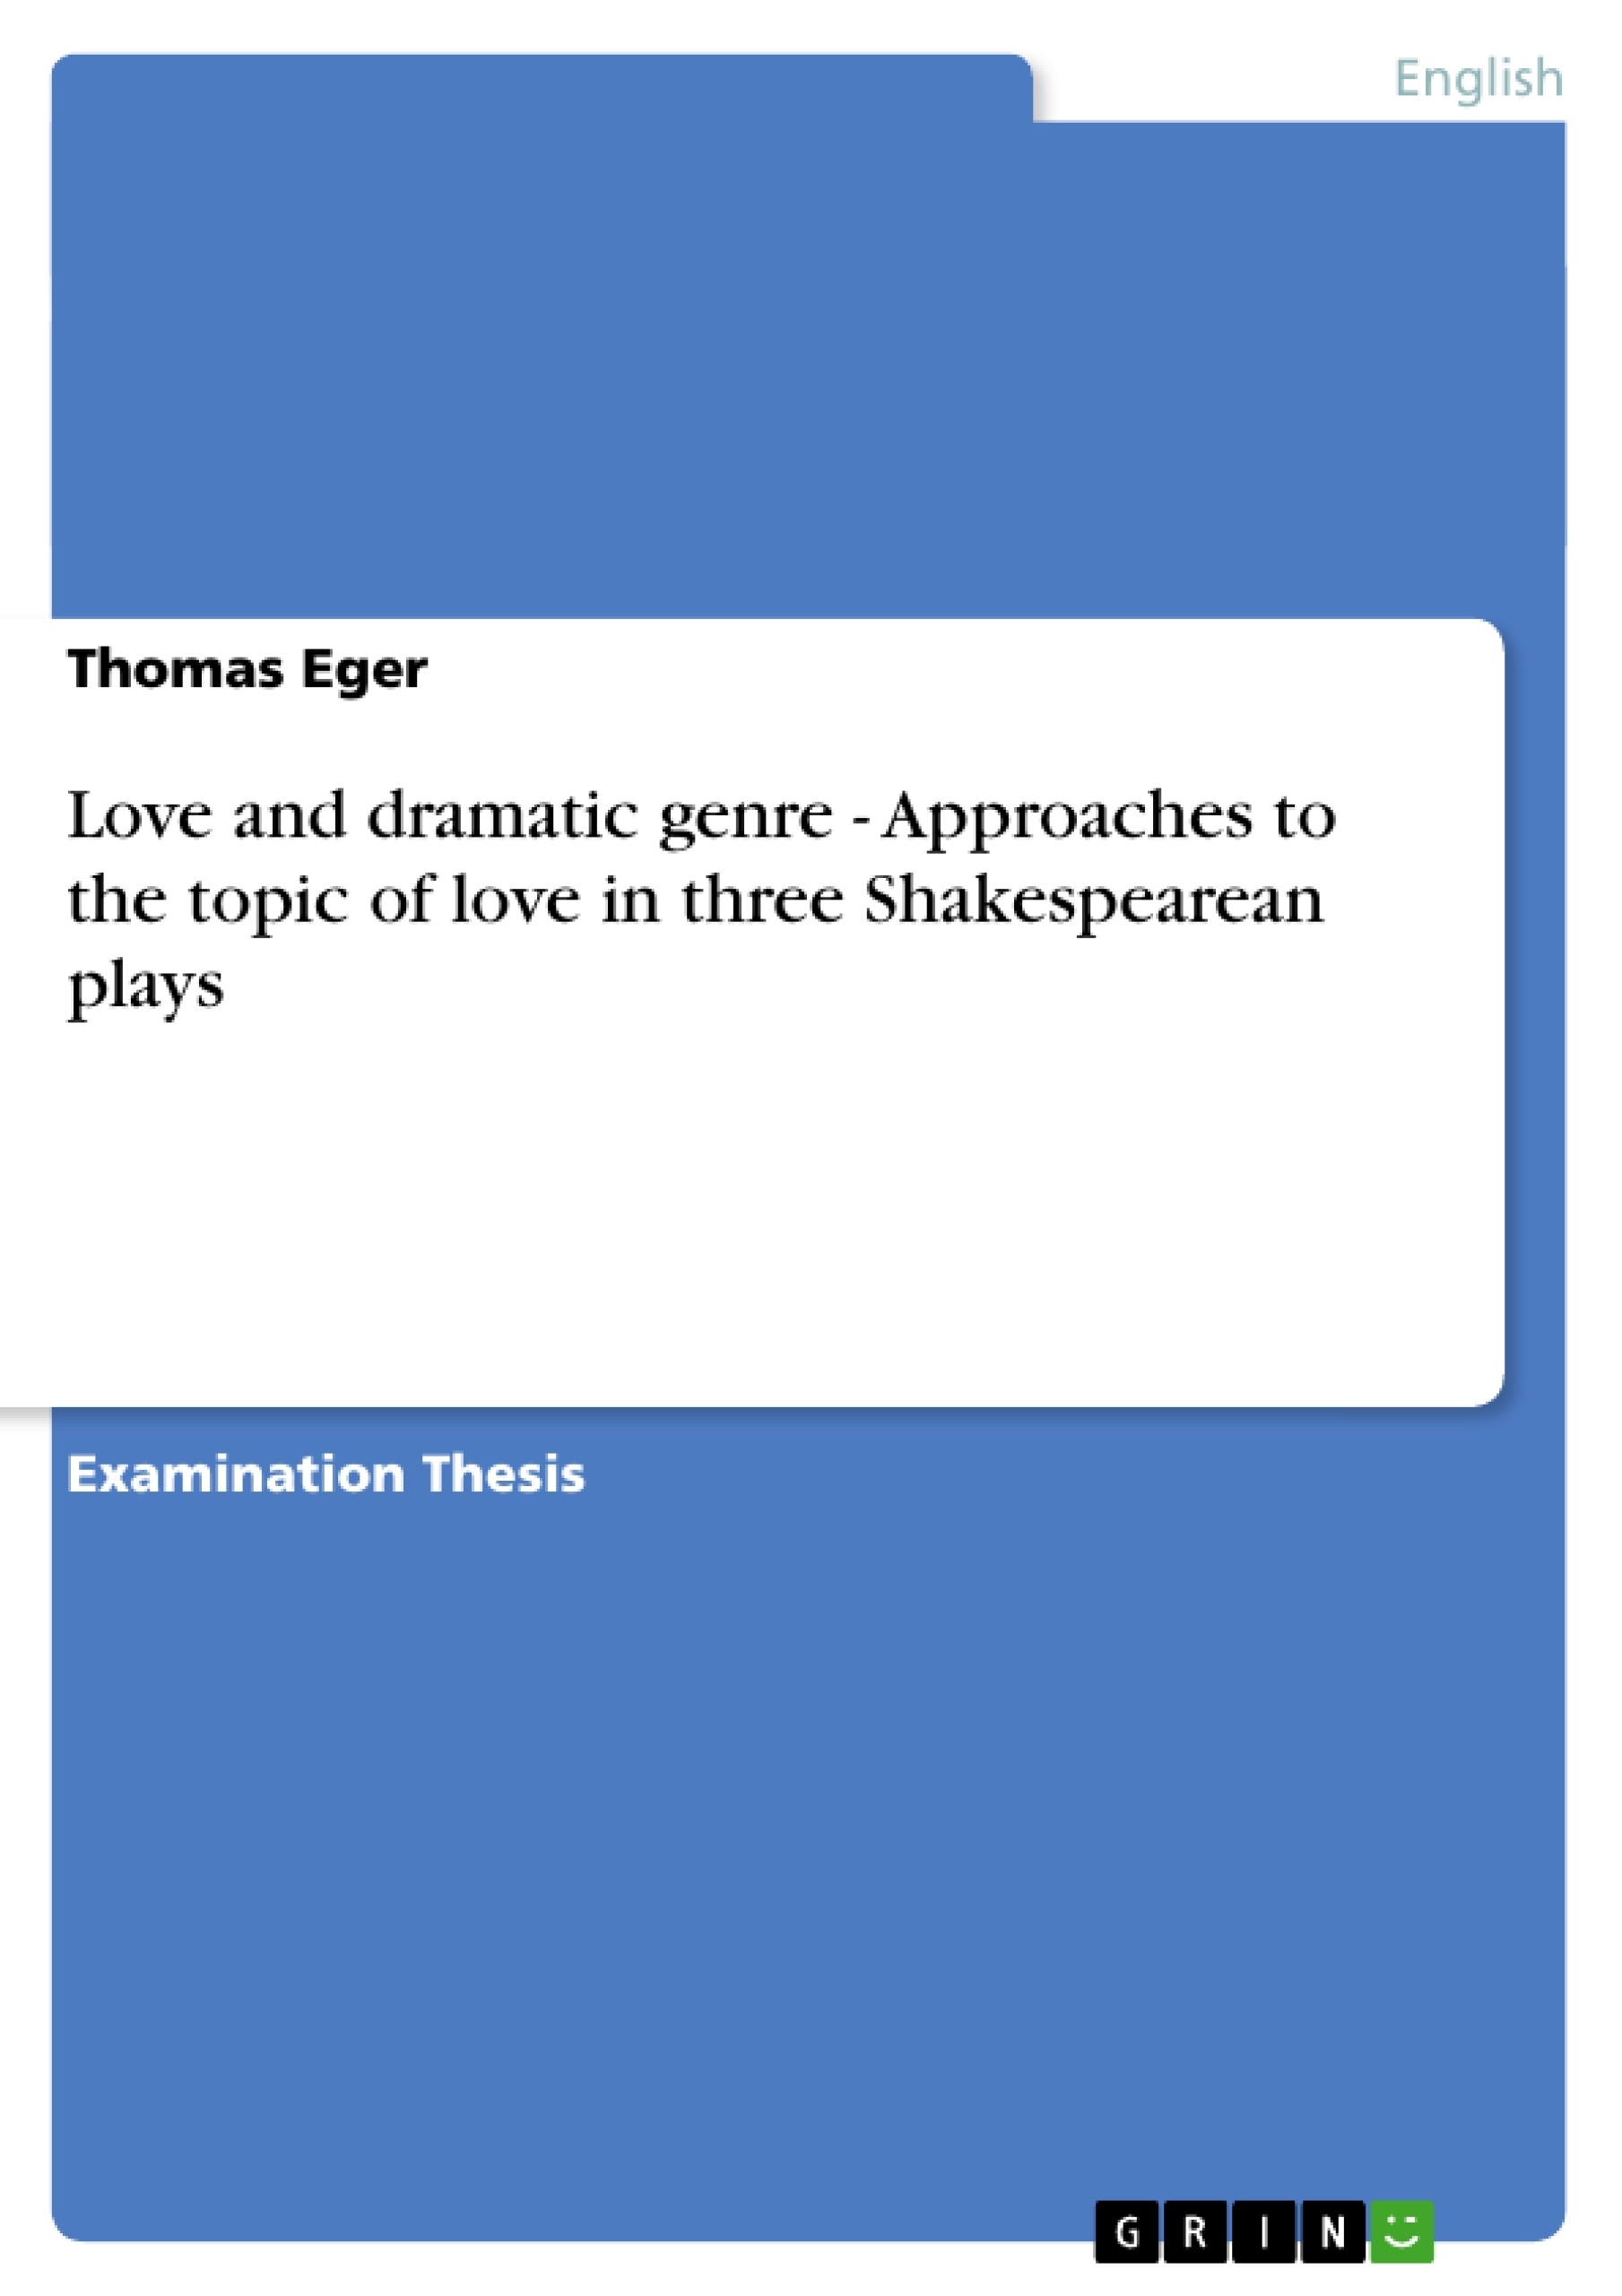 Title: Love and dramatic genre - Approaches to the topic of love in three Shakespearean plays